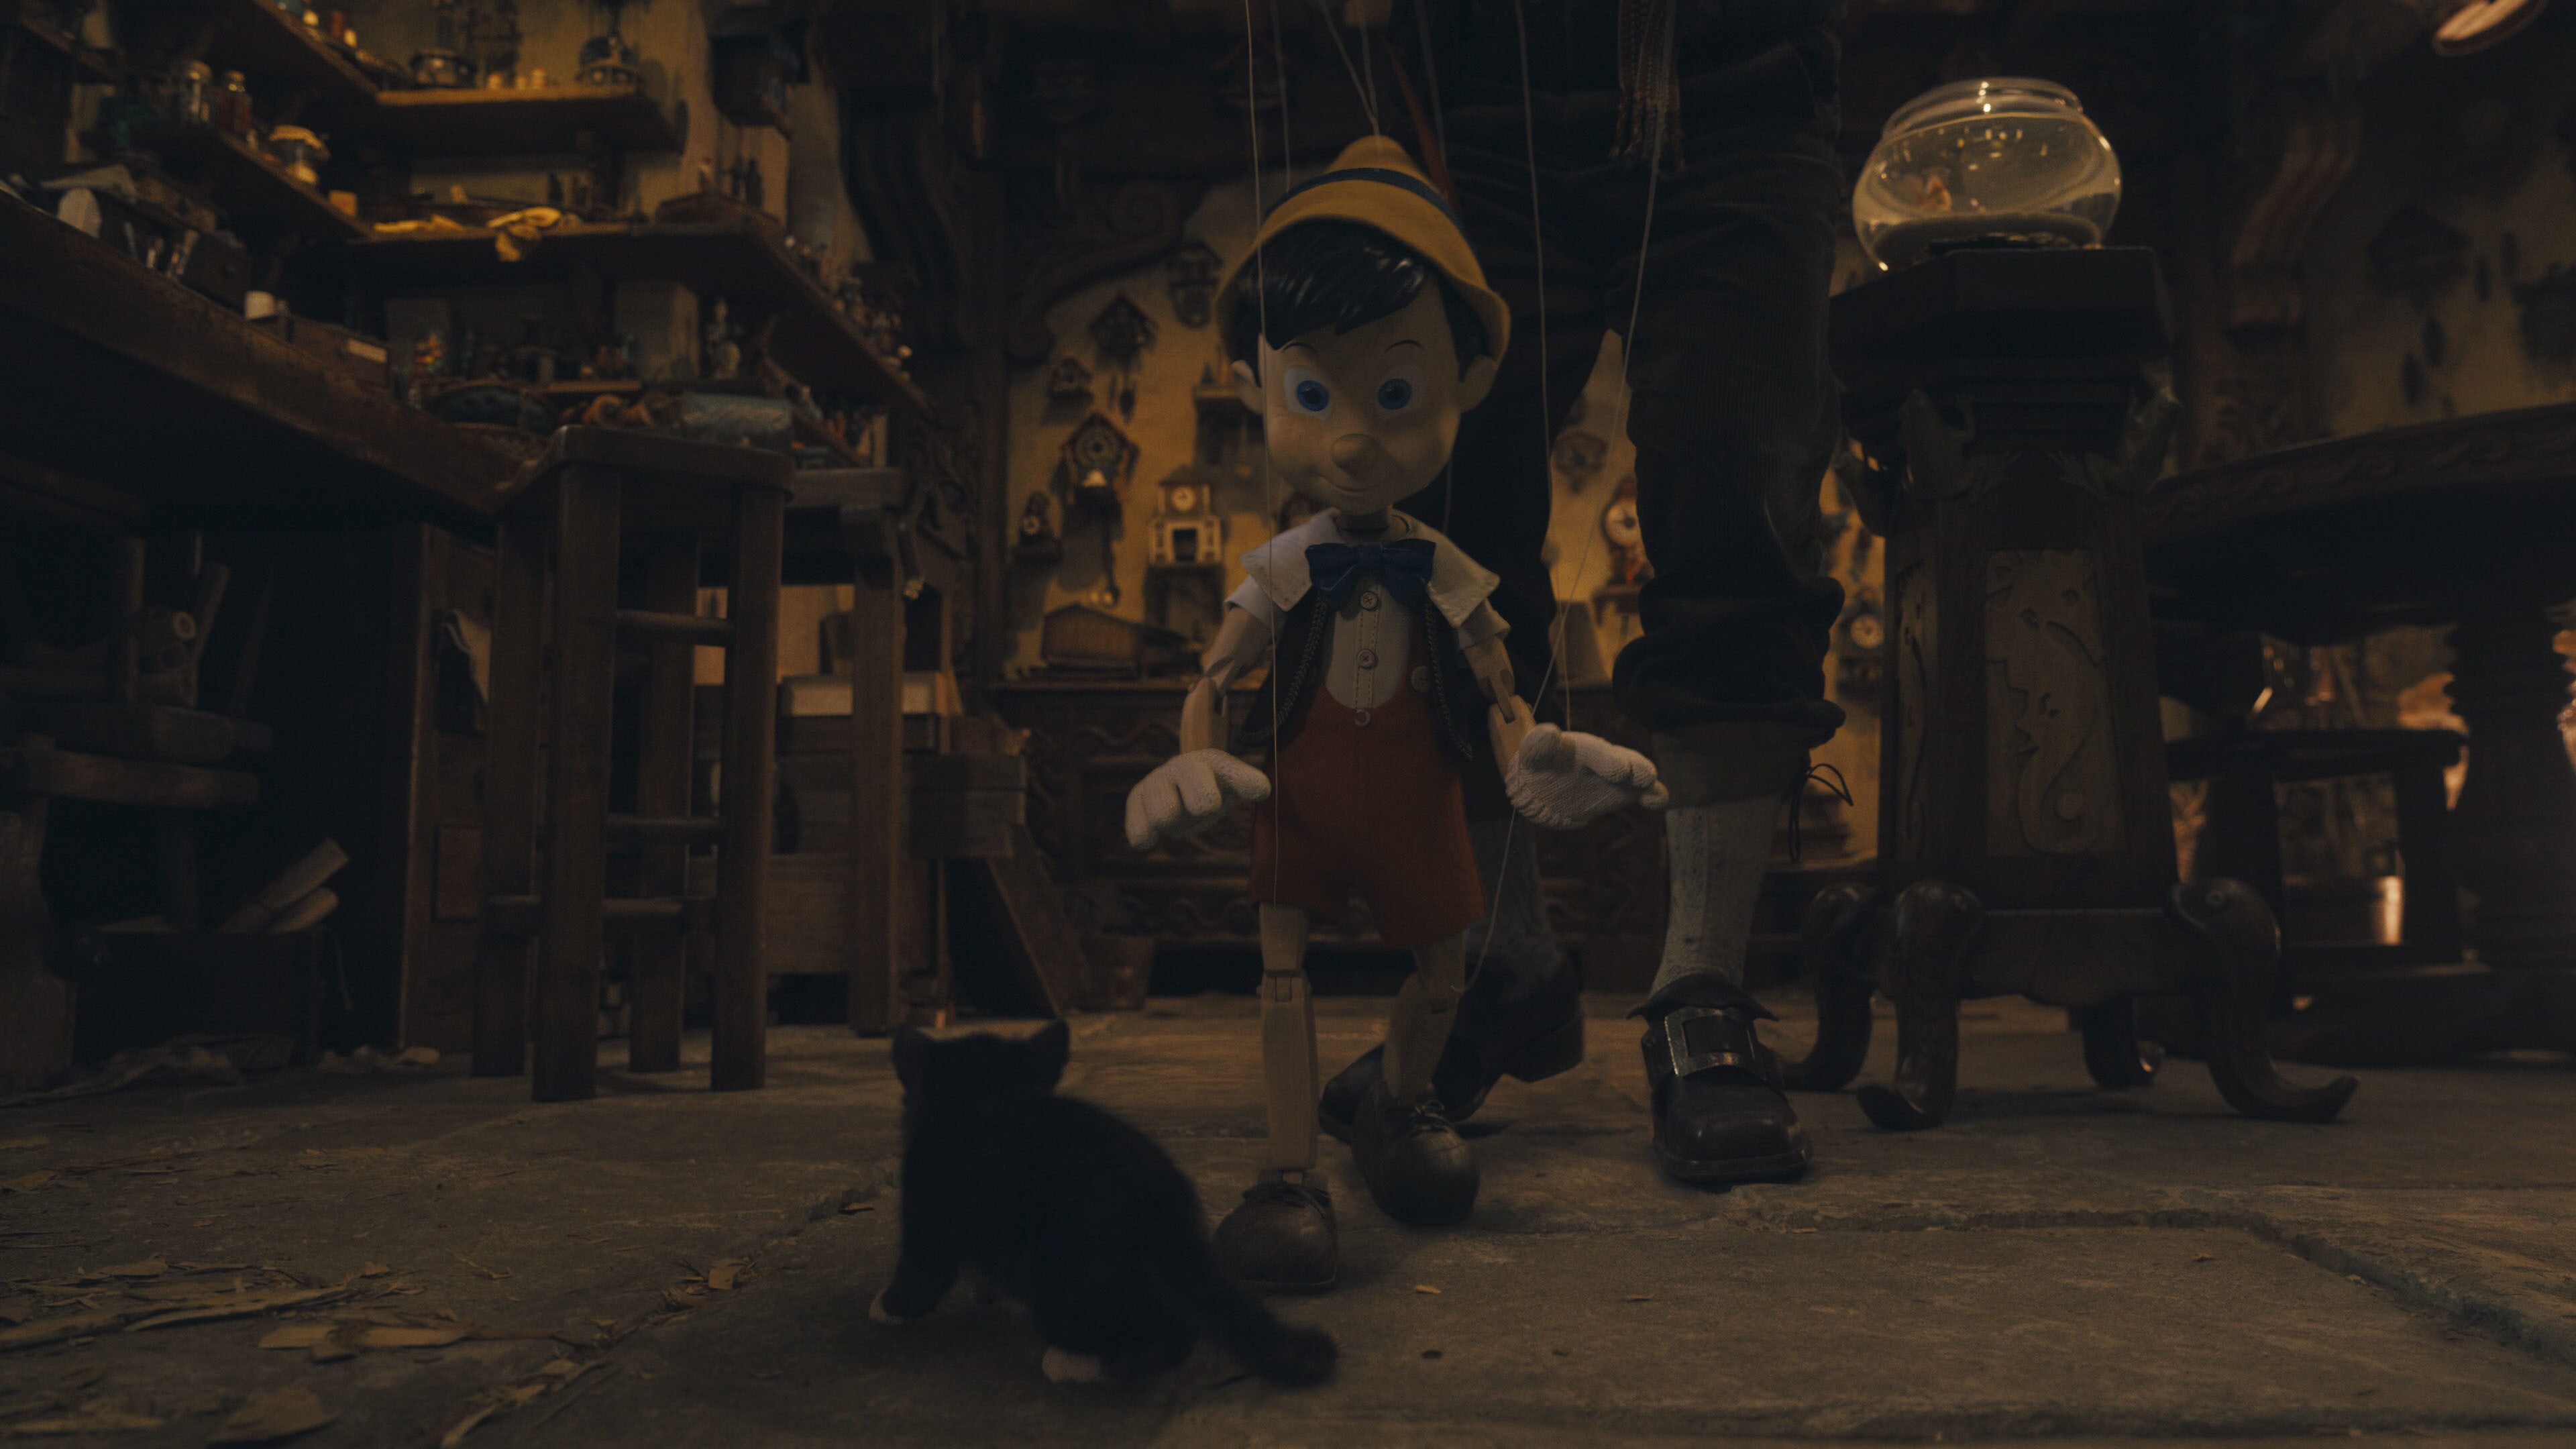 (L-R): Figaro and Pinocchio (voiced by Benjamin Evan Ainsworth) in Disney's live-action PINOCCHIO, exclusively on Disney+. Photo courtesy of Disney Enterprises, Inc. © 2022 Disney Enterprises, Inc. All Rights Reserved.